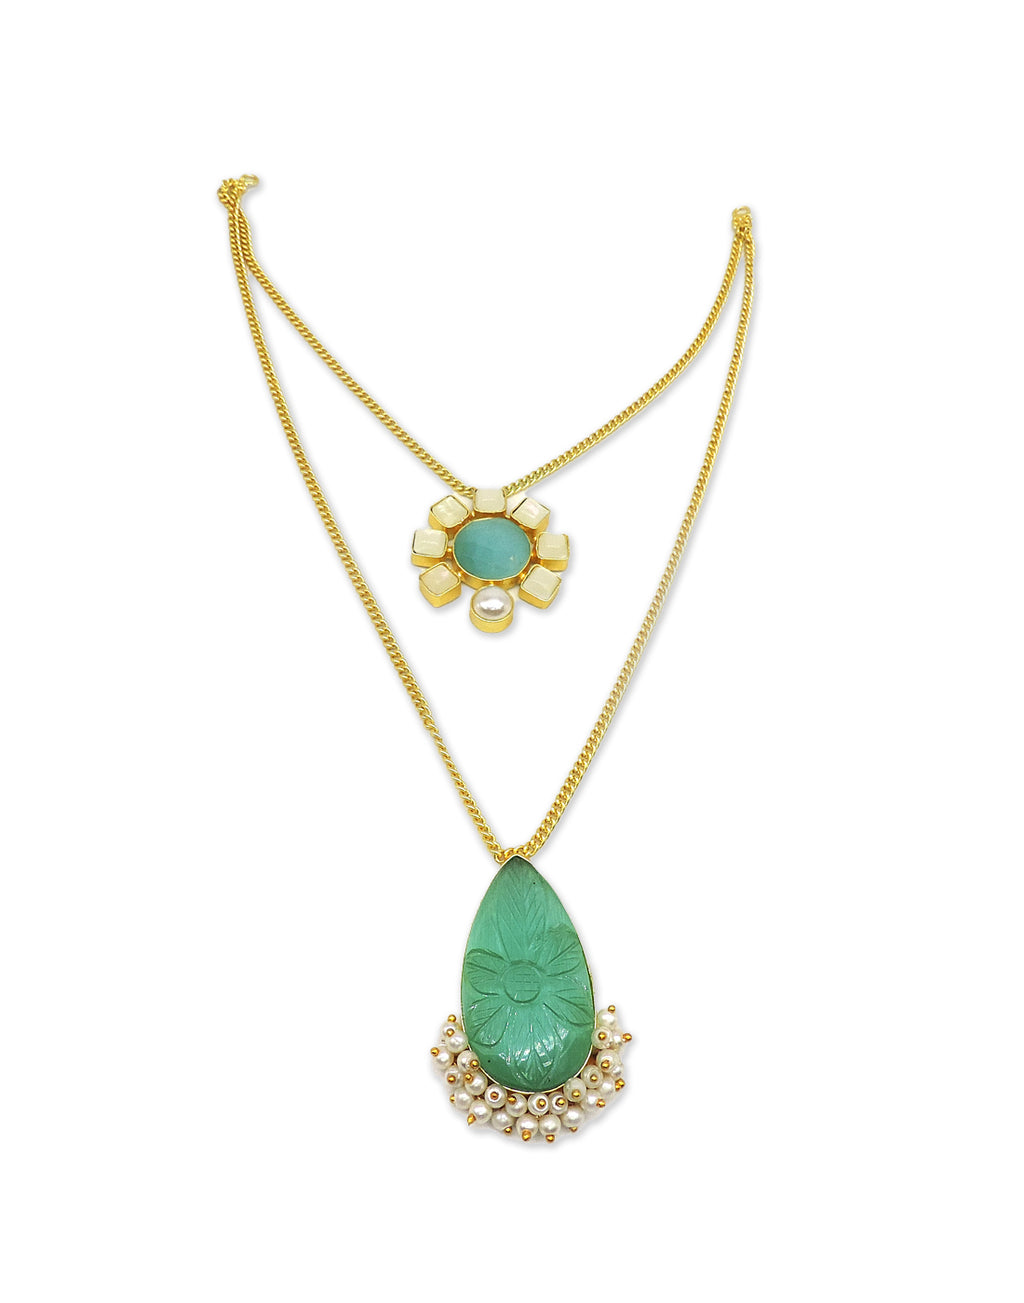 Green Monalisa Necklace - Statement Necklaces - Gold-Plated & Hypoallergenic Jewellery - Made in India - Dubai Jewellery - Dori